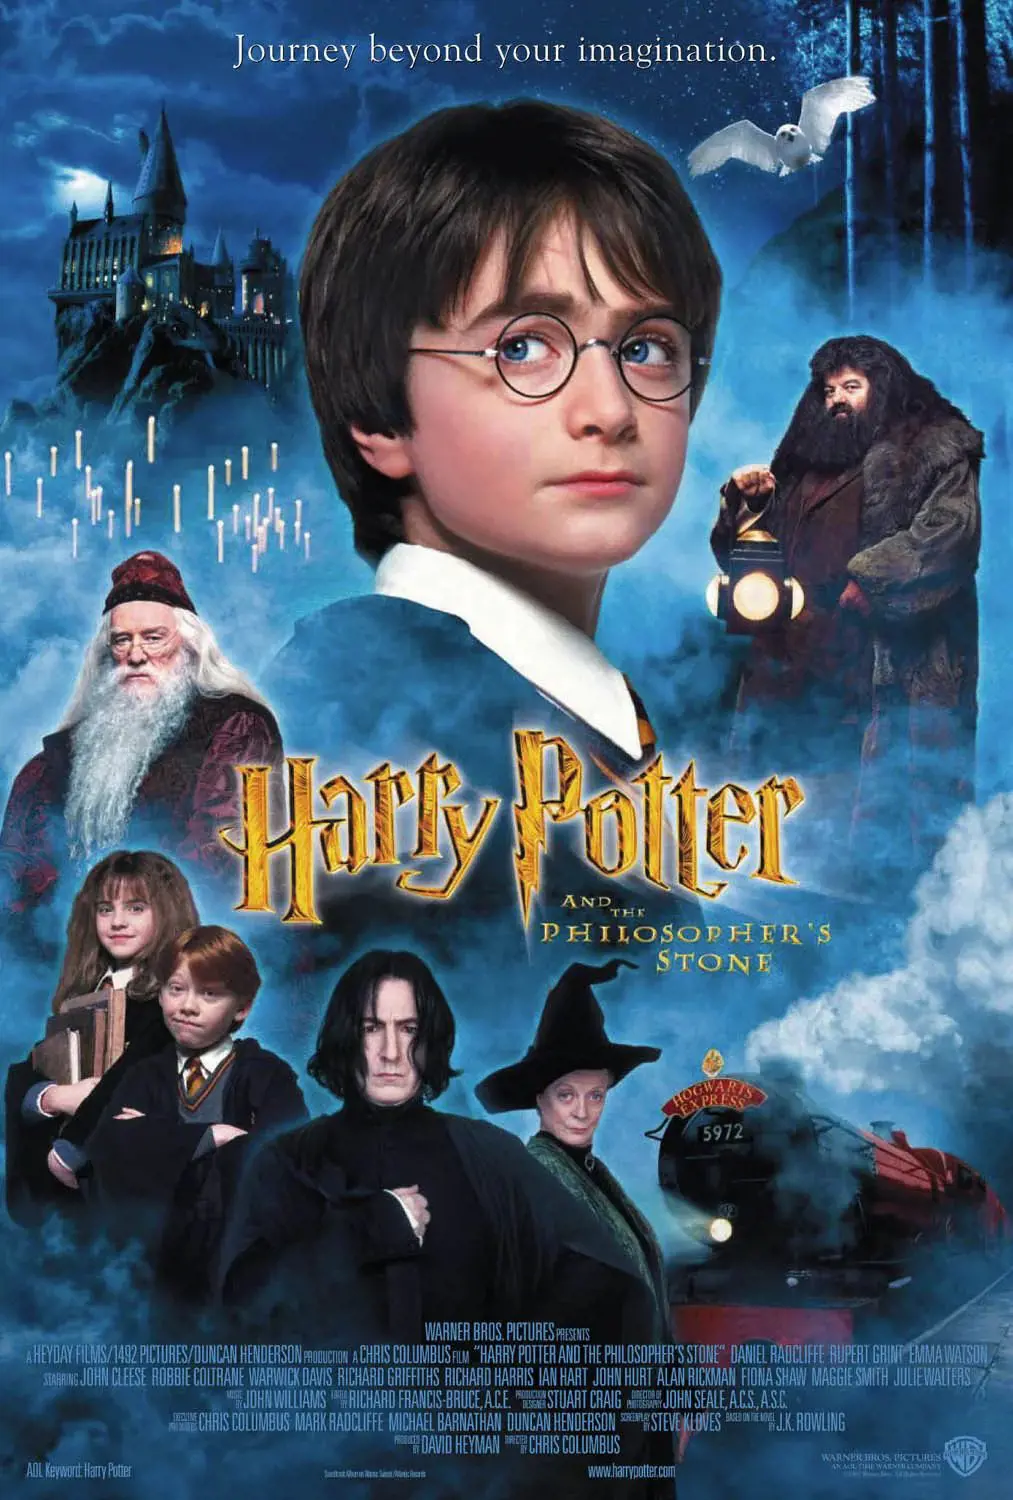 Harry Potter has been removed from the streaming service of Peacock.